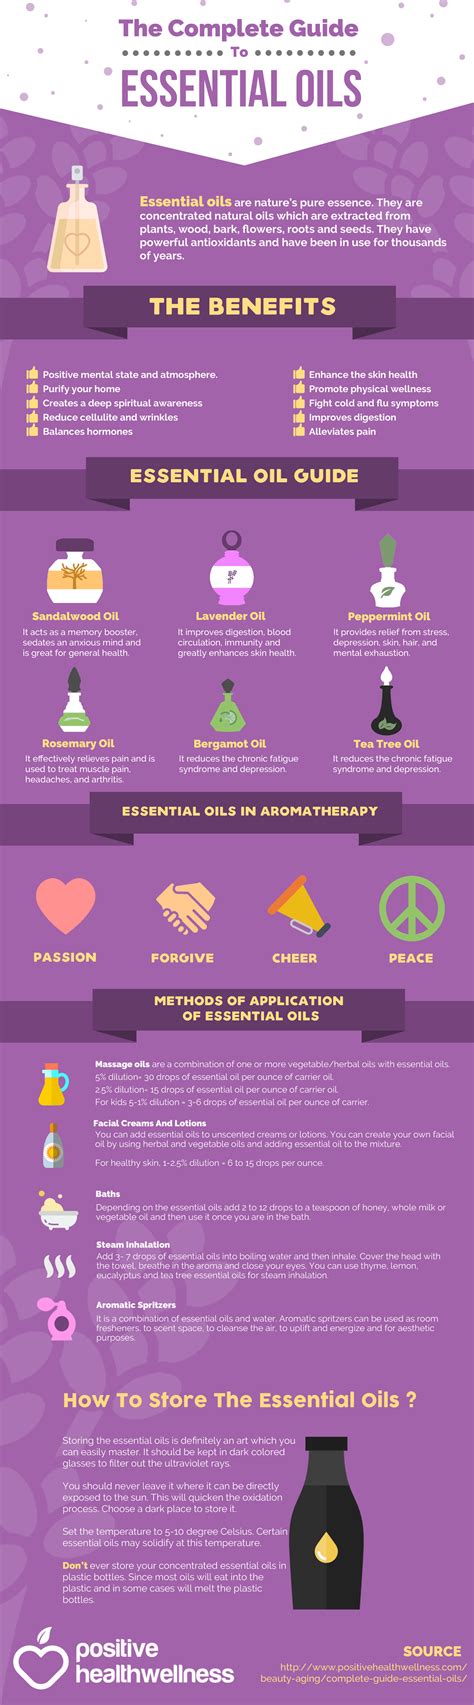 The Complete Guide To Essential Oils